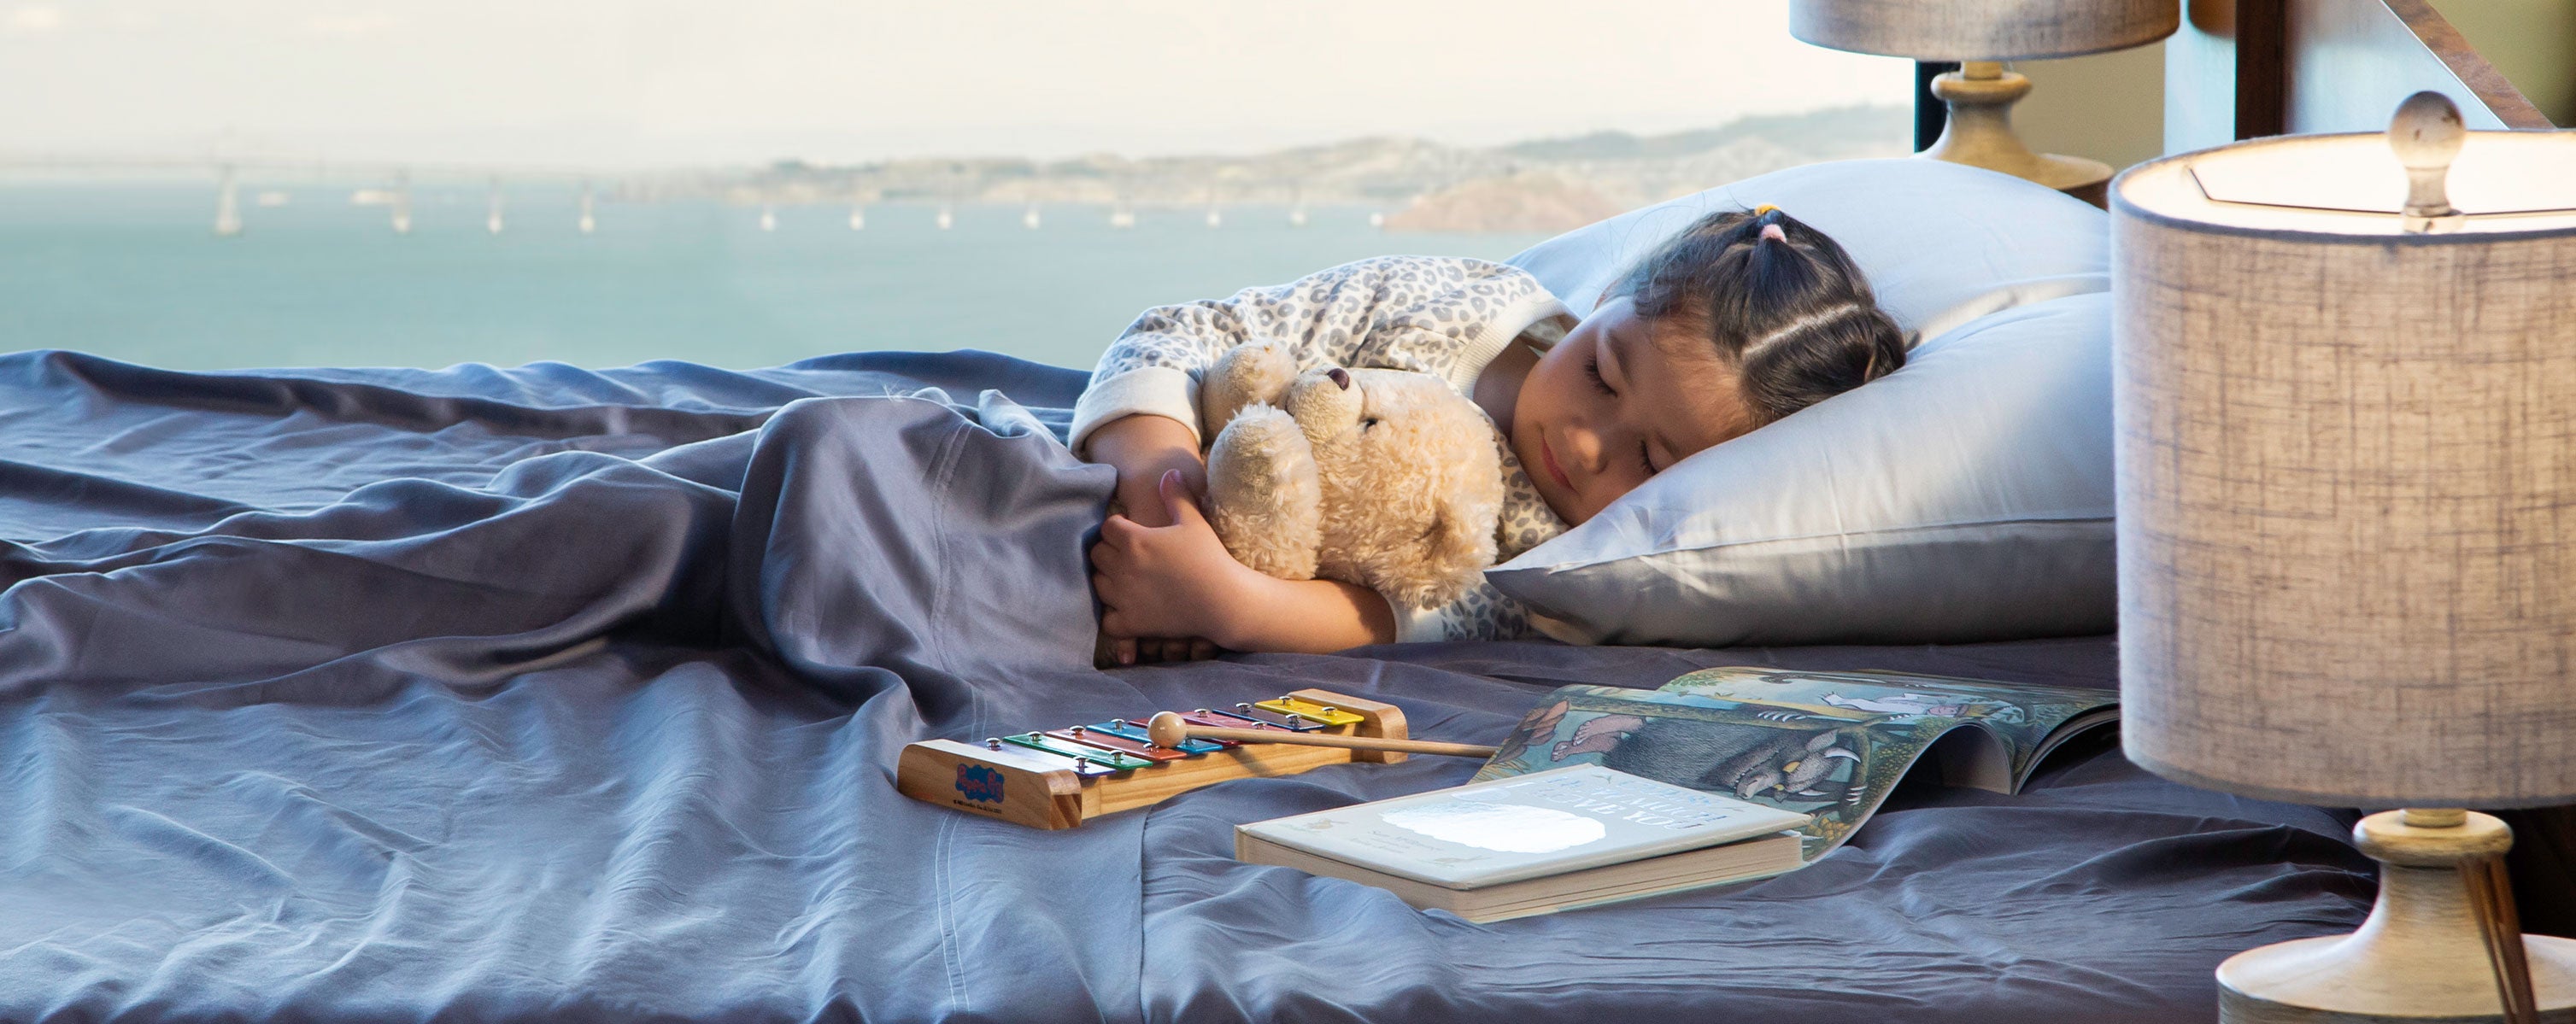 Buy a Weighted Blanket for Kids, FREE Shipping